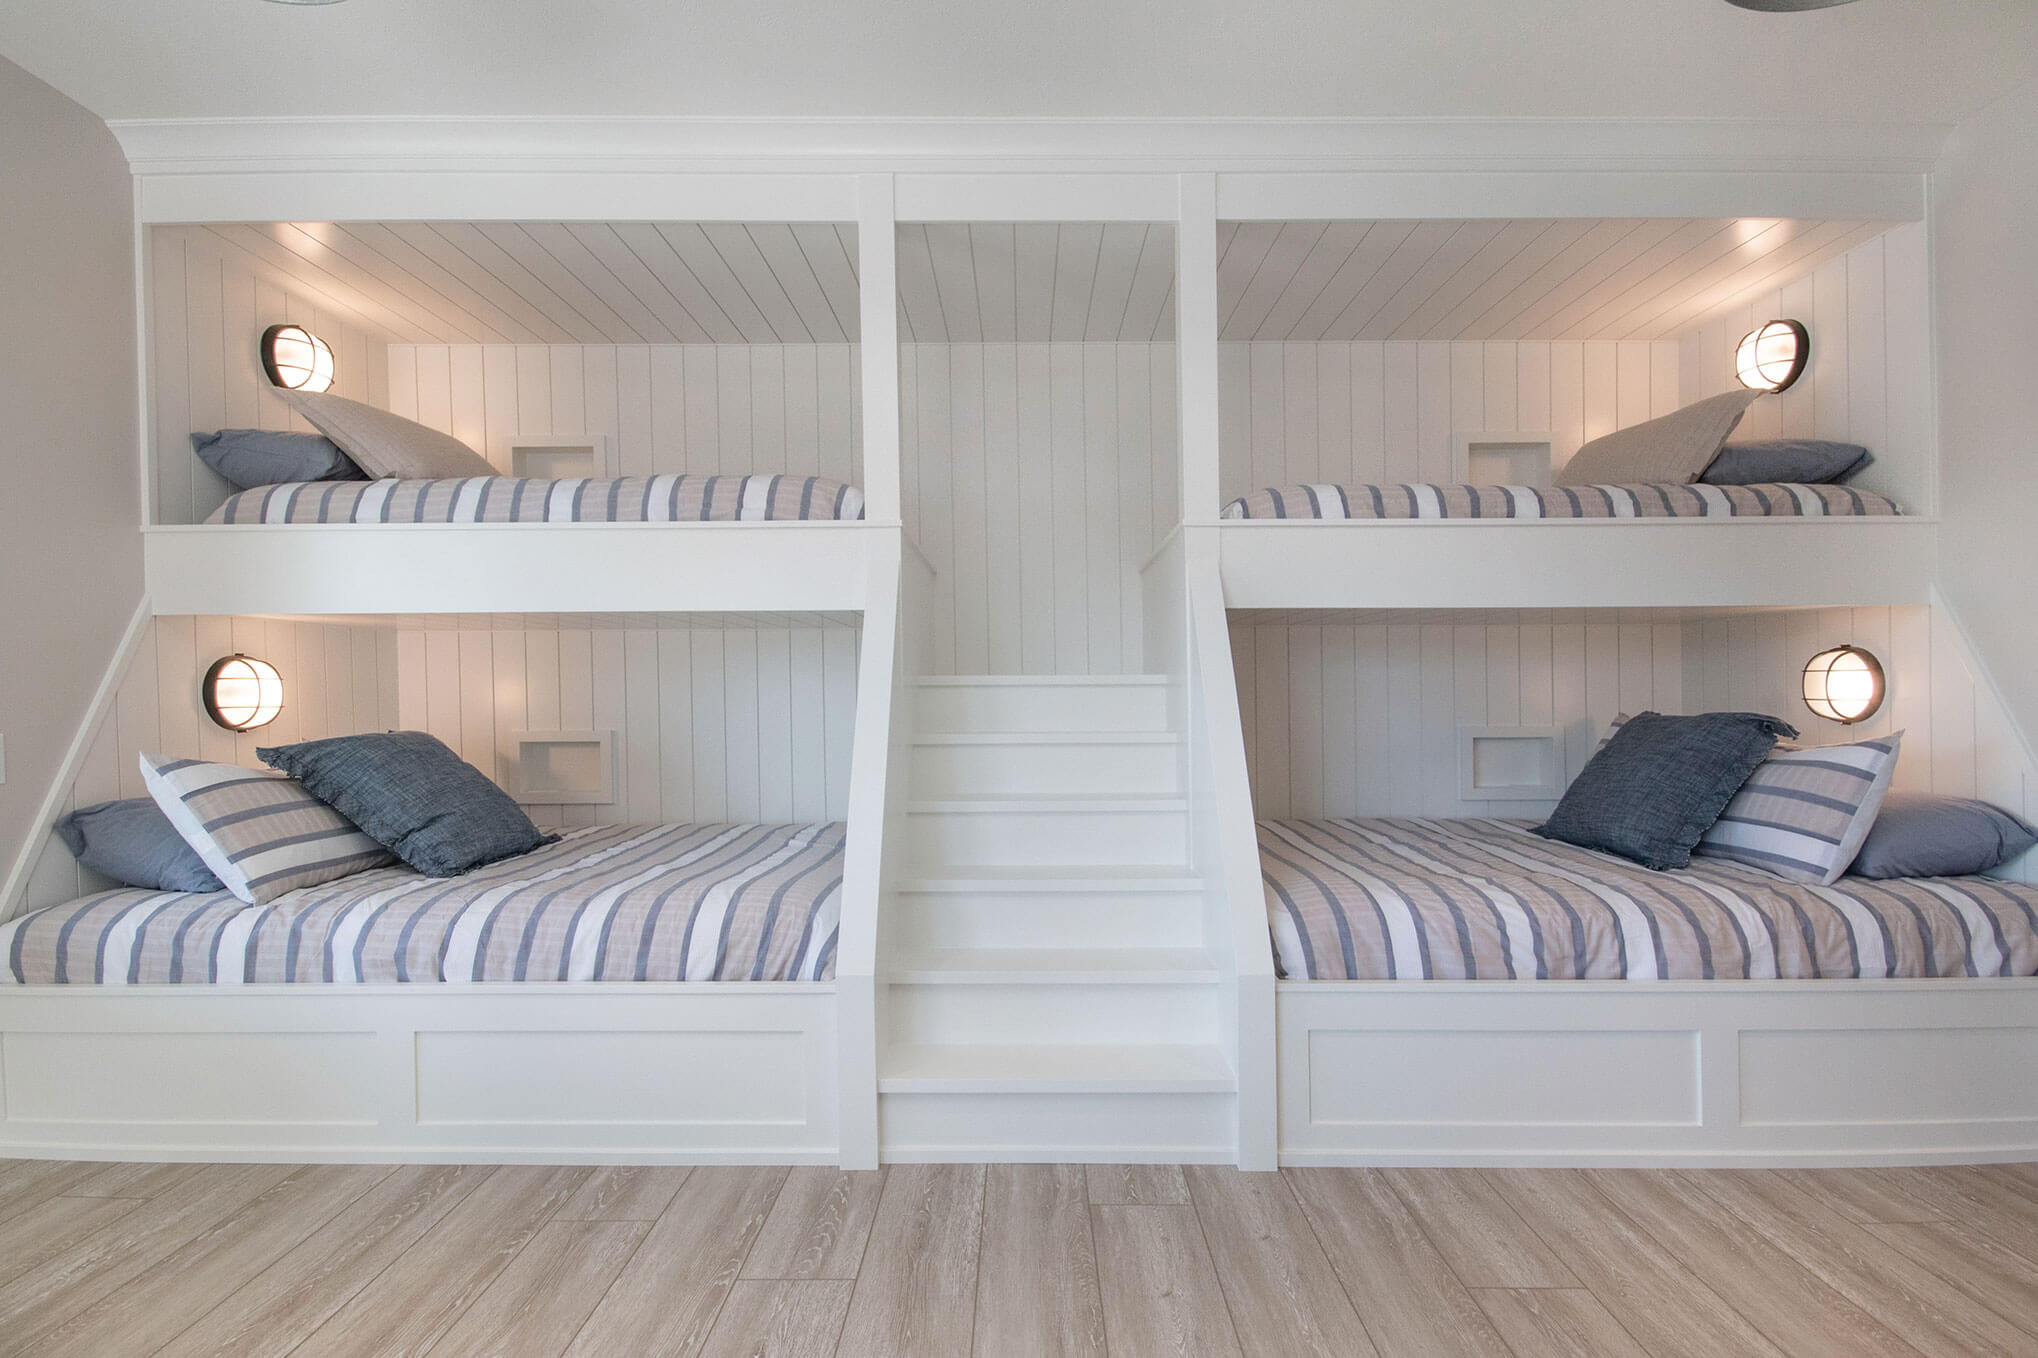 25 Bunk Bed Ideas For Small Bedrooms, Fixer Upper Bunk Beds With Stairs